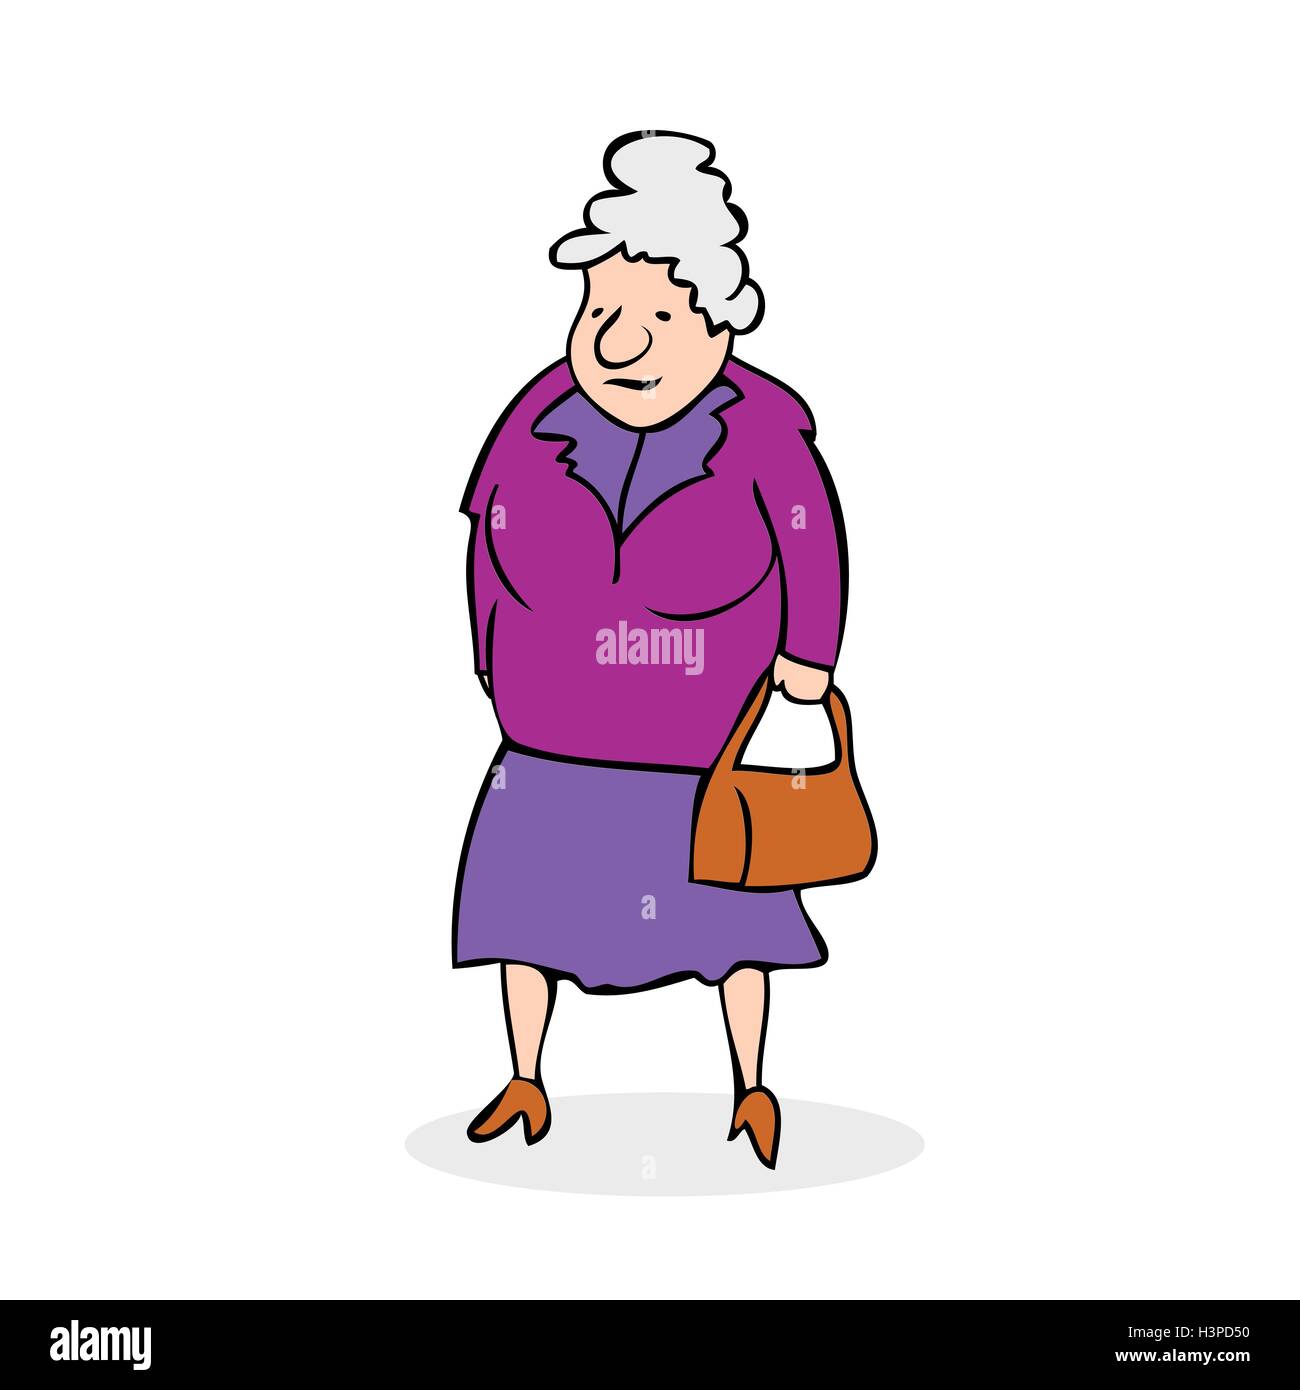 Funny Old Lady Cartoons